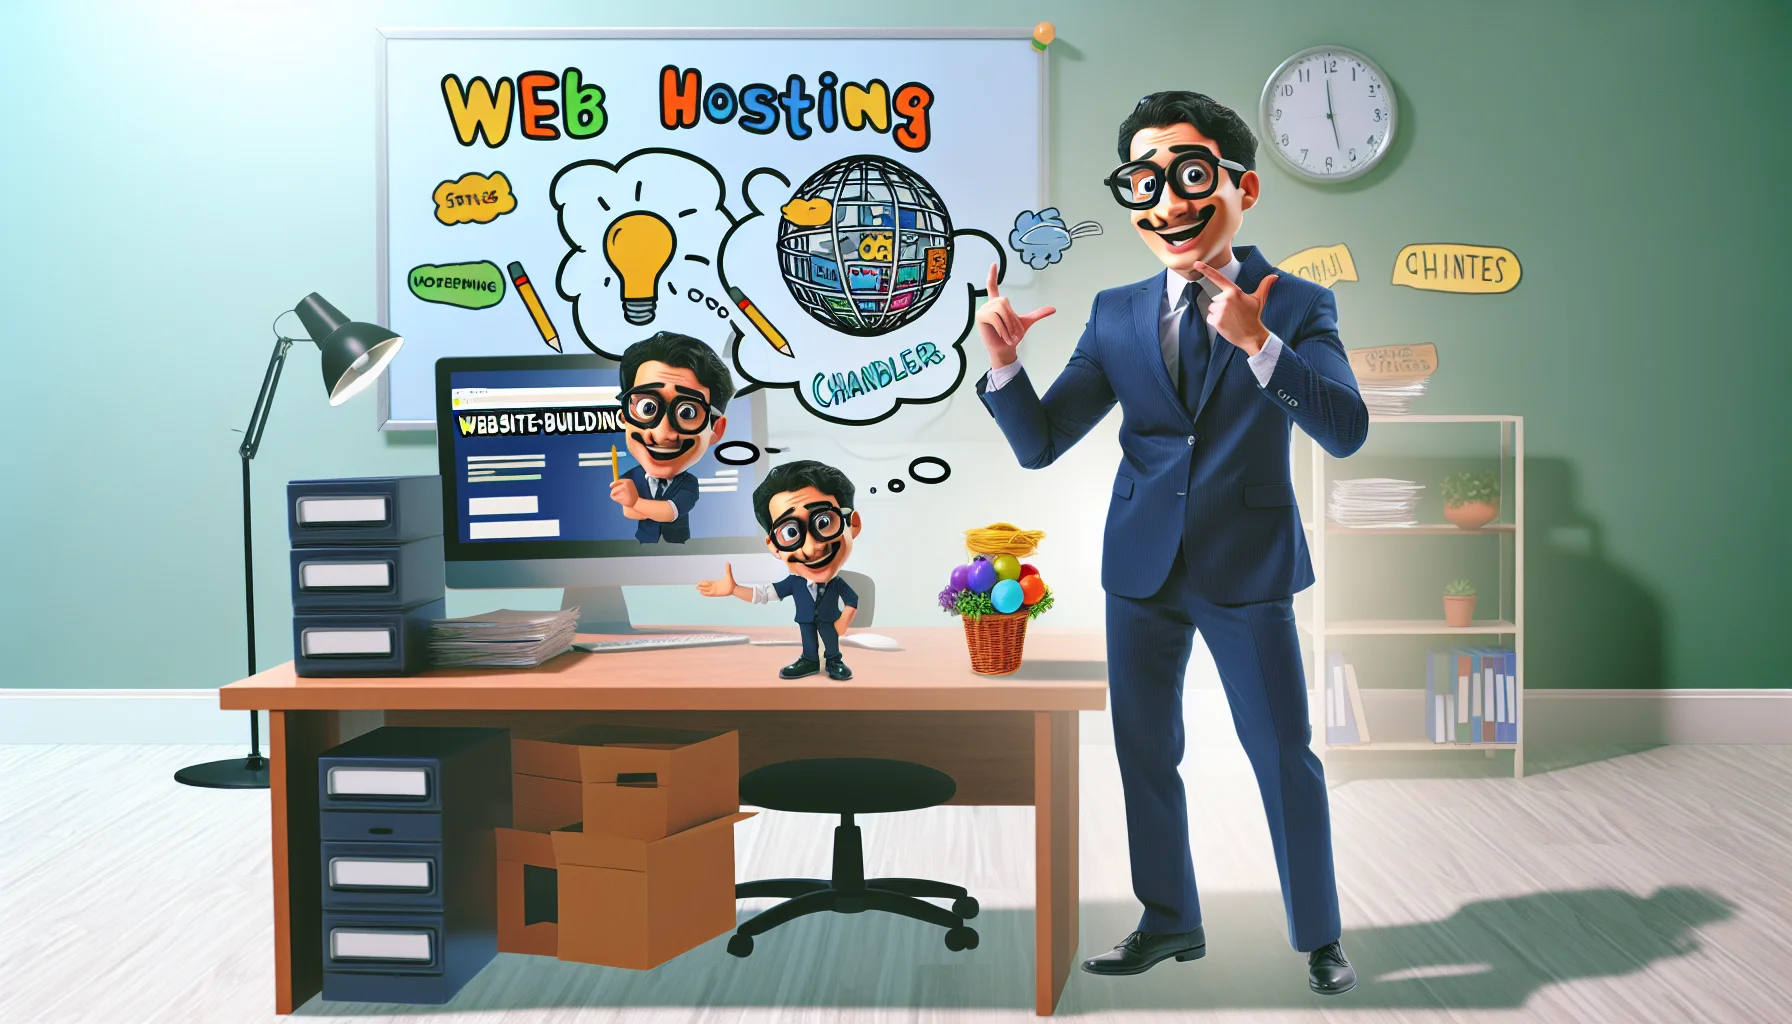 Create a lighthearted and amusing scenario featuring a fictional website-building character known as 'Chandler' who is working at 'Westberg & Associates', a fictitious digital services agency. The scene should showcase Chandler comically dealing with various elements of web hosting in imaginative and engaging ways. It would give the audience a sense of enjoyment and interest promoting the concept of website building and hosting.